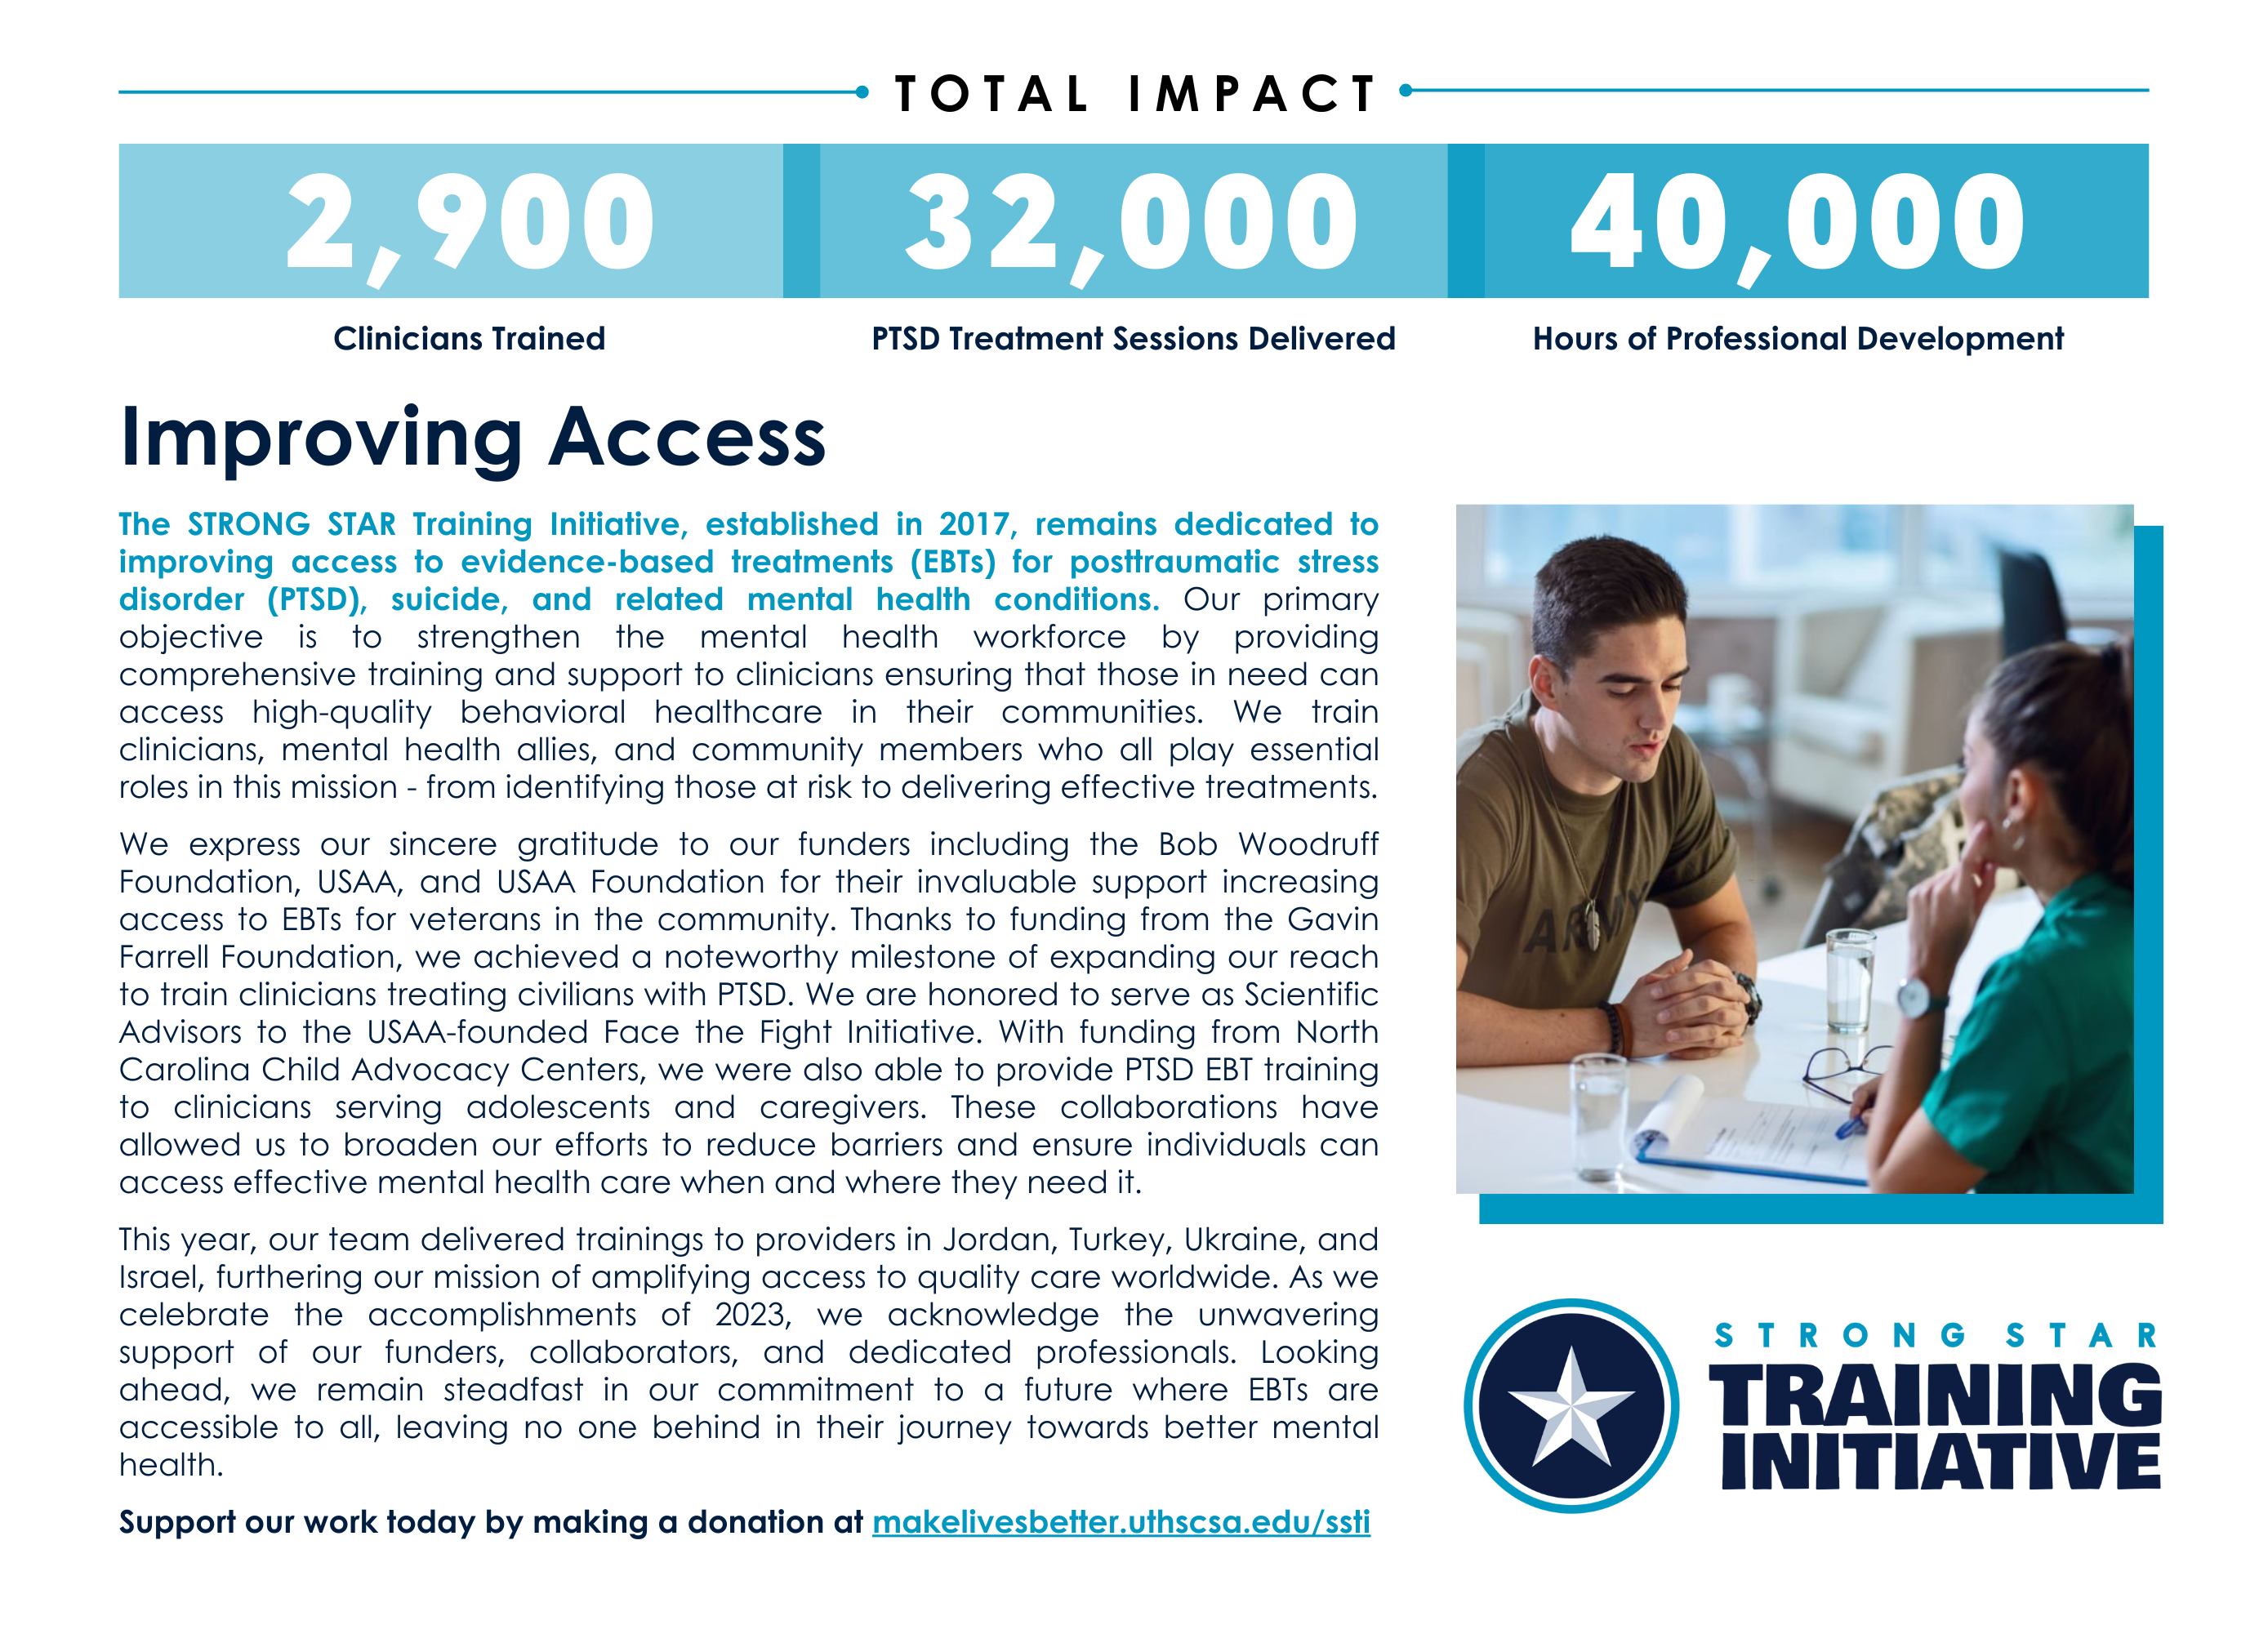 "TOTAL IMPACT, 2,900 Clinicians Trained, 32,000 PTSD Treatment Sessions Delivered, 40,000 Hours of Professional Development" text on the rest of the image reads "IMPROVING ACCESS: The STRONG STAR Training Initiative, established in 2017, remains dedicated to improving access to evidence-based treatments (EBTs) for posttraumatic stress disorder (PTSD), suicide, and related mental health conditions. Our primary objective is to strengthen the mental health workforce by providing comprehensive training and support to clinicians ensuring that those in need can access high-quality behavioral healthcare in their communities. We train clinicians, mental health allies, and community members who all play essential roles in this mission - from identifying those at risk to delivering effective treatments. We express our sincere gratitude to our funders including the Bob Woodruff Foundation, USAA, and USAA Foundation for their invaluable support increasing access to EBTs for veterans in the community. Thanks to funding from the Gavin Farrell Foundation, we achieved a noteworthy milestone of expanding our reach to train clinicians treating civilians with PTSD. We are honored to serve as Scientific Advisors to the USAA-founded Face the Fight Initiative. With funding from North Carolina Child Advocacy Centers, we were also able to provide PTSD EBT training to clinicians serving adolescents and caregivers. These collaborations have allowed us to broaden our efforts to reduce barriers and ensure individuals can access effective mental health care when and where they need it. This year, our team delivered trainings to providers in Jordan, Turkey, Ukraine, and Israel, furthering our mission of amplifying access to quality care worldwide. As we celebrate the accomplishments of 2023, we acknowledge the unwavering support of our funders, collaborators, and dedicated professionals. Looking ahead, we remain steadfast in our commitment to a future where EBTs are accessible to all, leaving no one behind in their journey towards better mental health. Support our work today by making a donation at makelivesbetter.uthscsa.edu/ssti" to the right of the text is an image of a veteran speaking to a person taking notes on a clipboard.